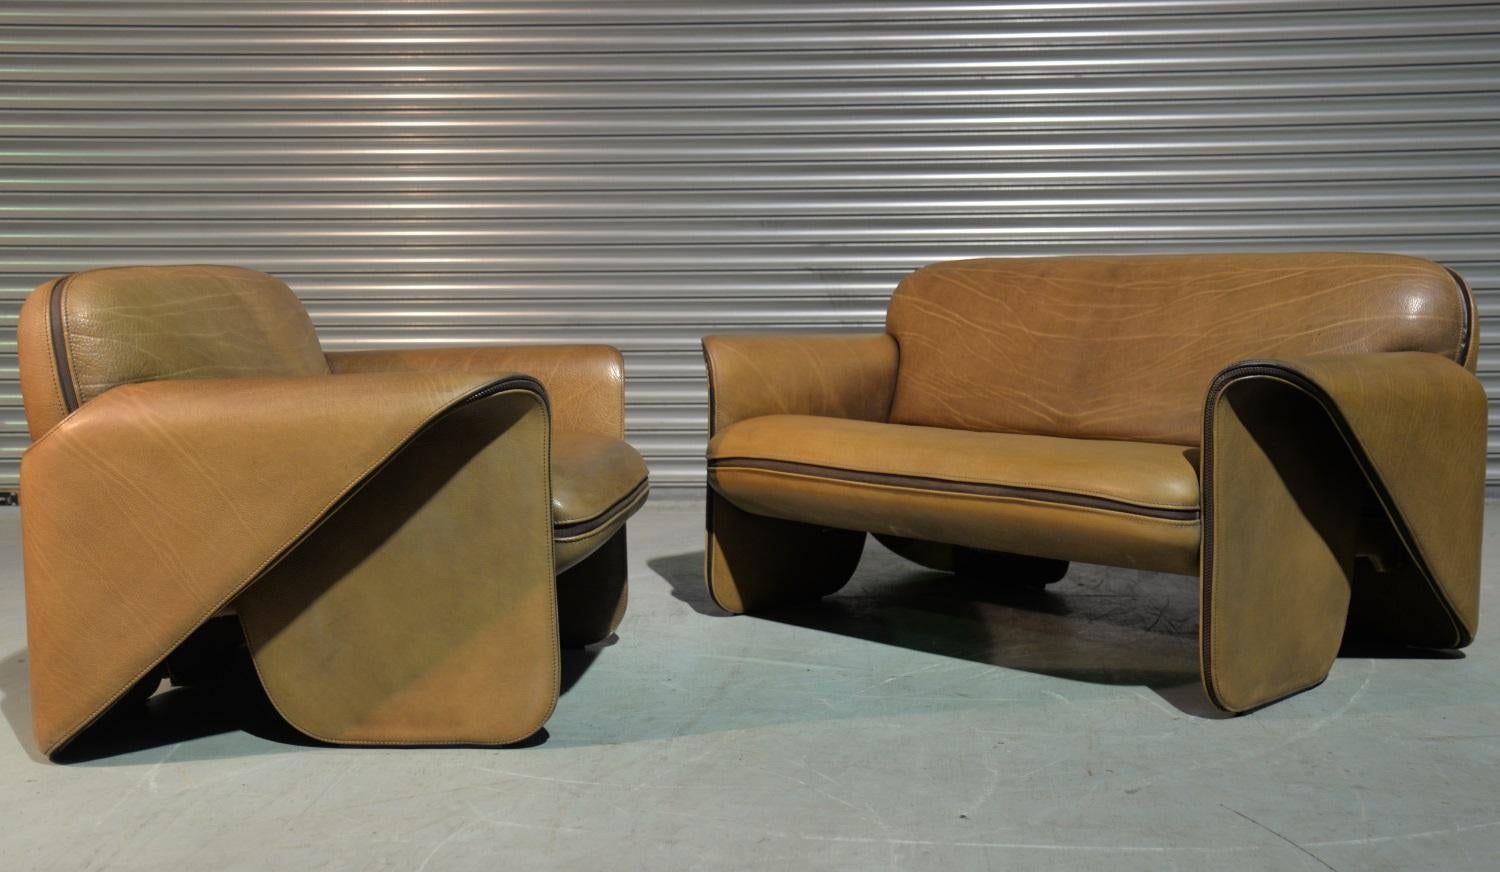 Late 20th Century Vintage Swiss De Sede 'DS 125' Sofa and Armchair Designed by Gerd Lange, 1978